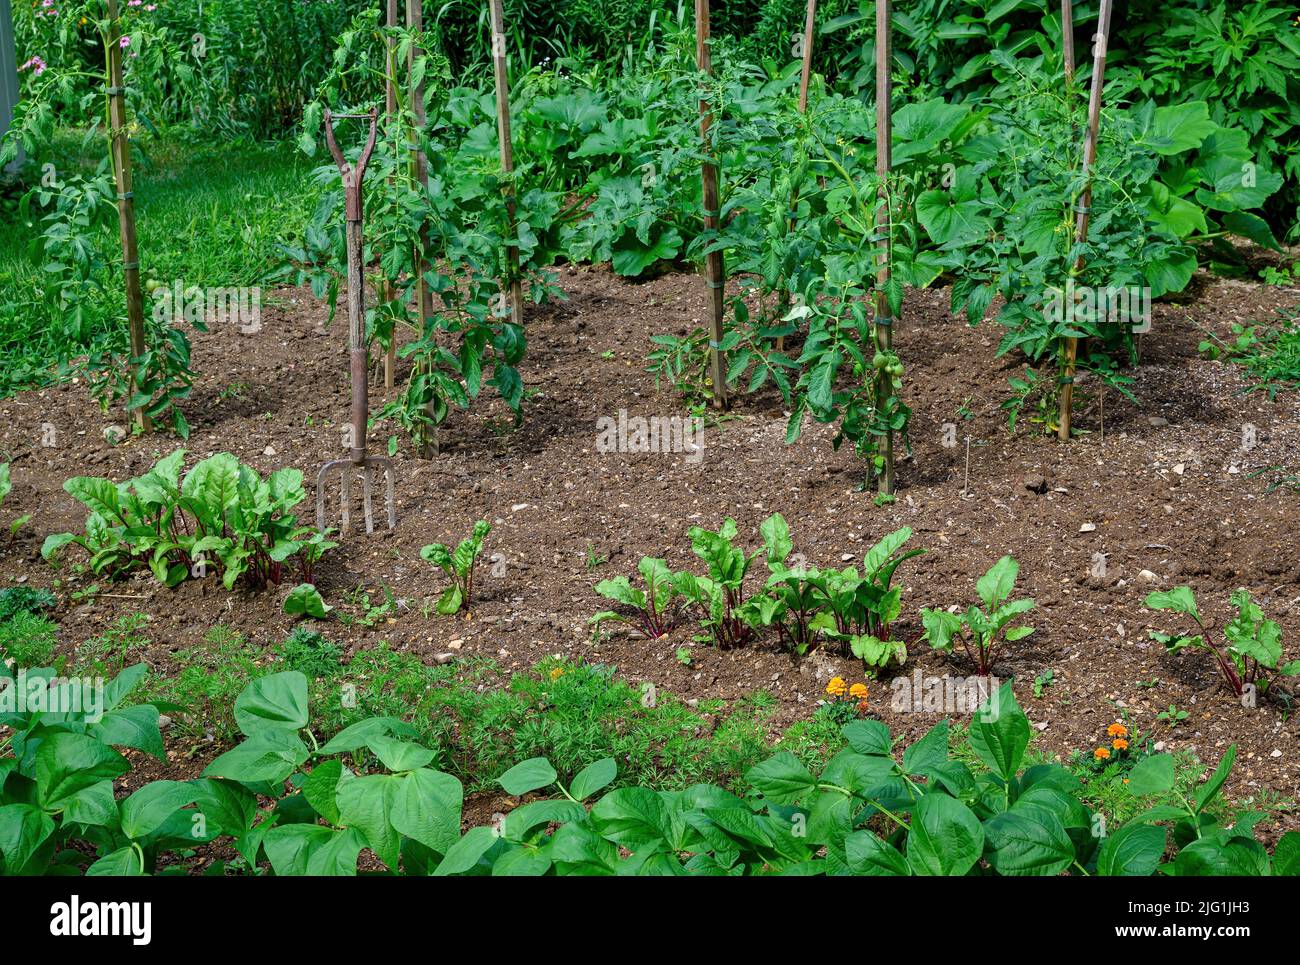 Home vegetable garden on a sunny day. Crops include carrot, marigold flower as a companion plant to deter bugs, red beet, tomato, beans Stock Photo